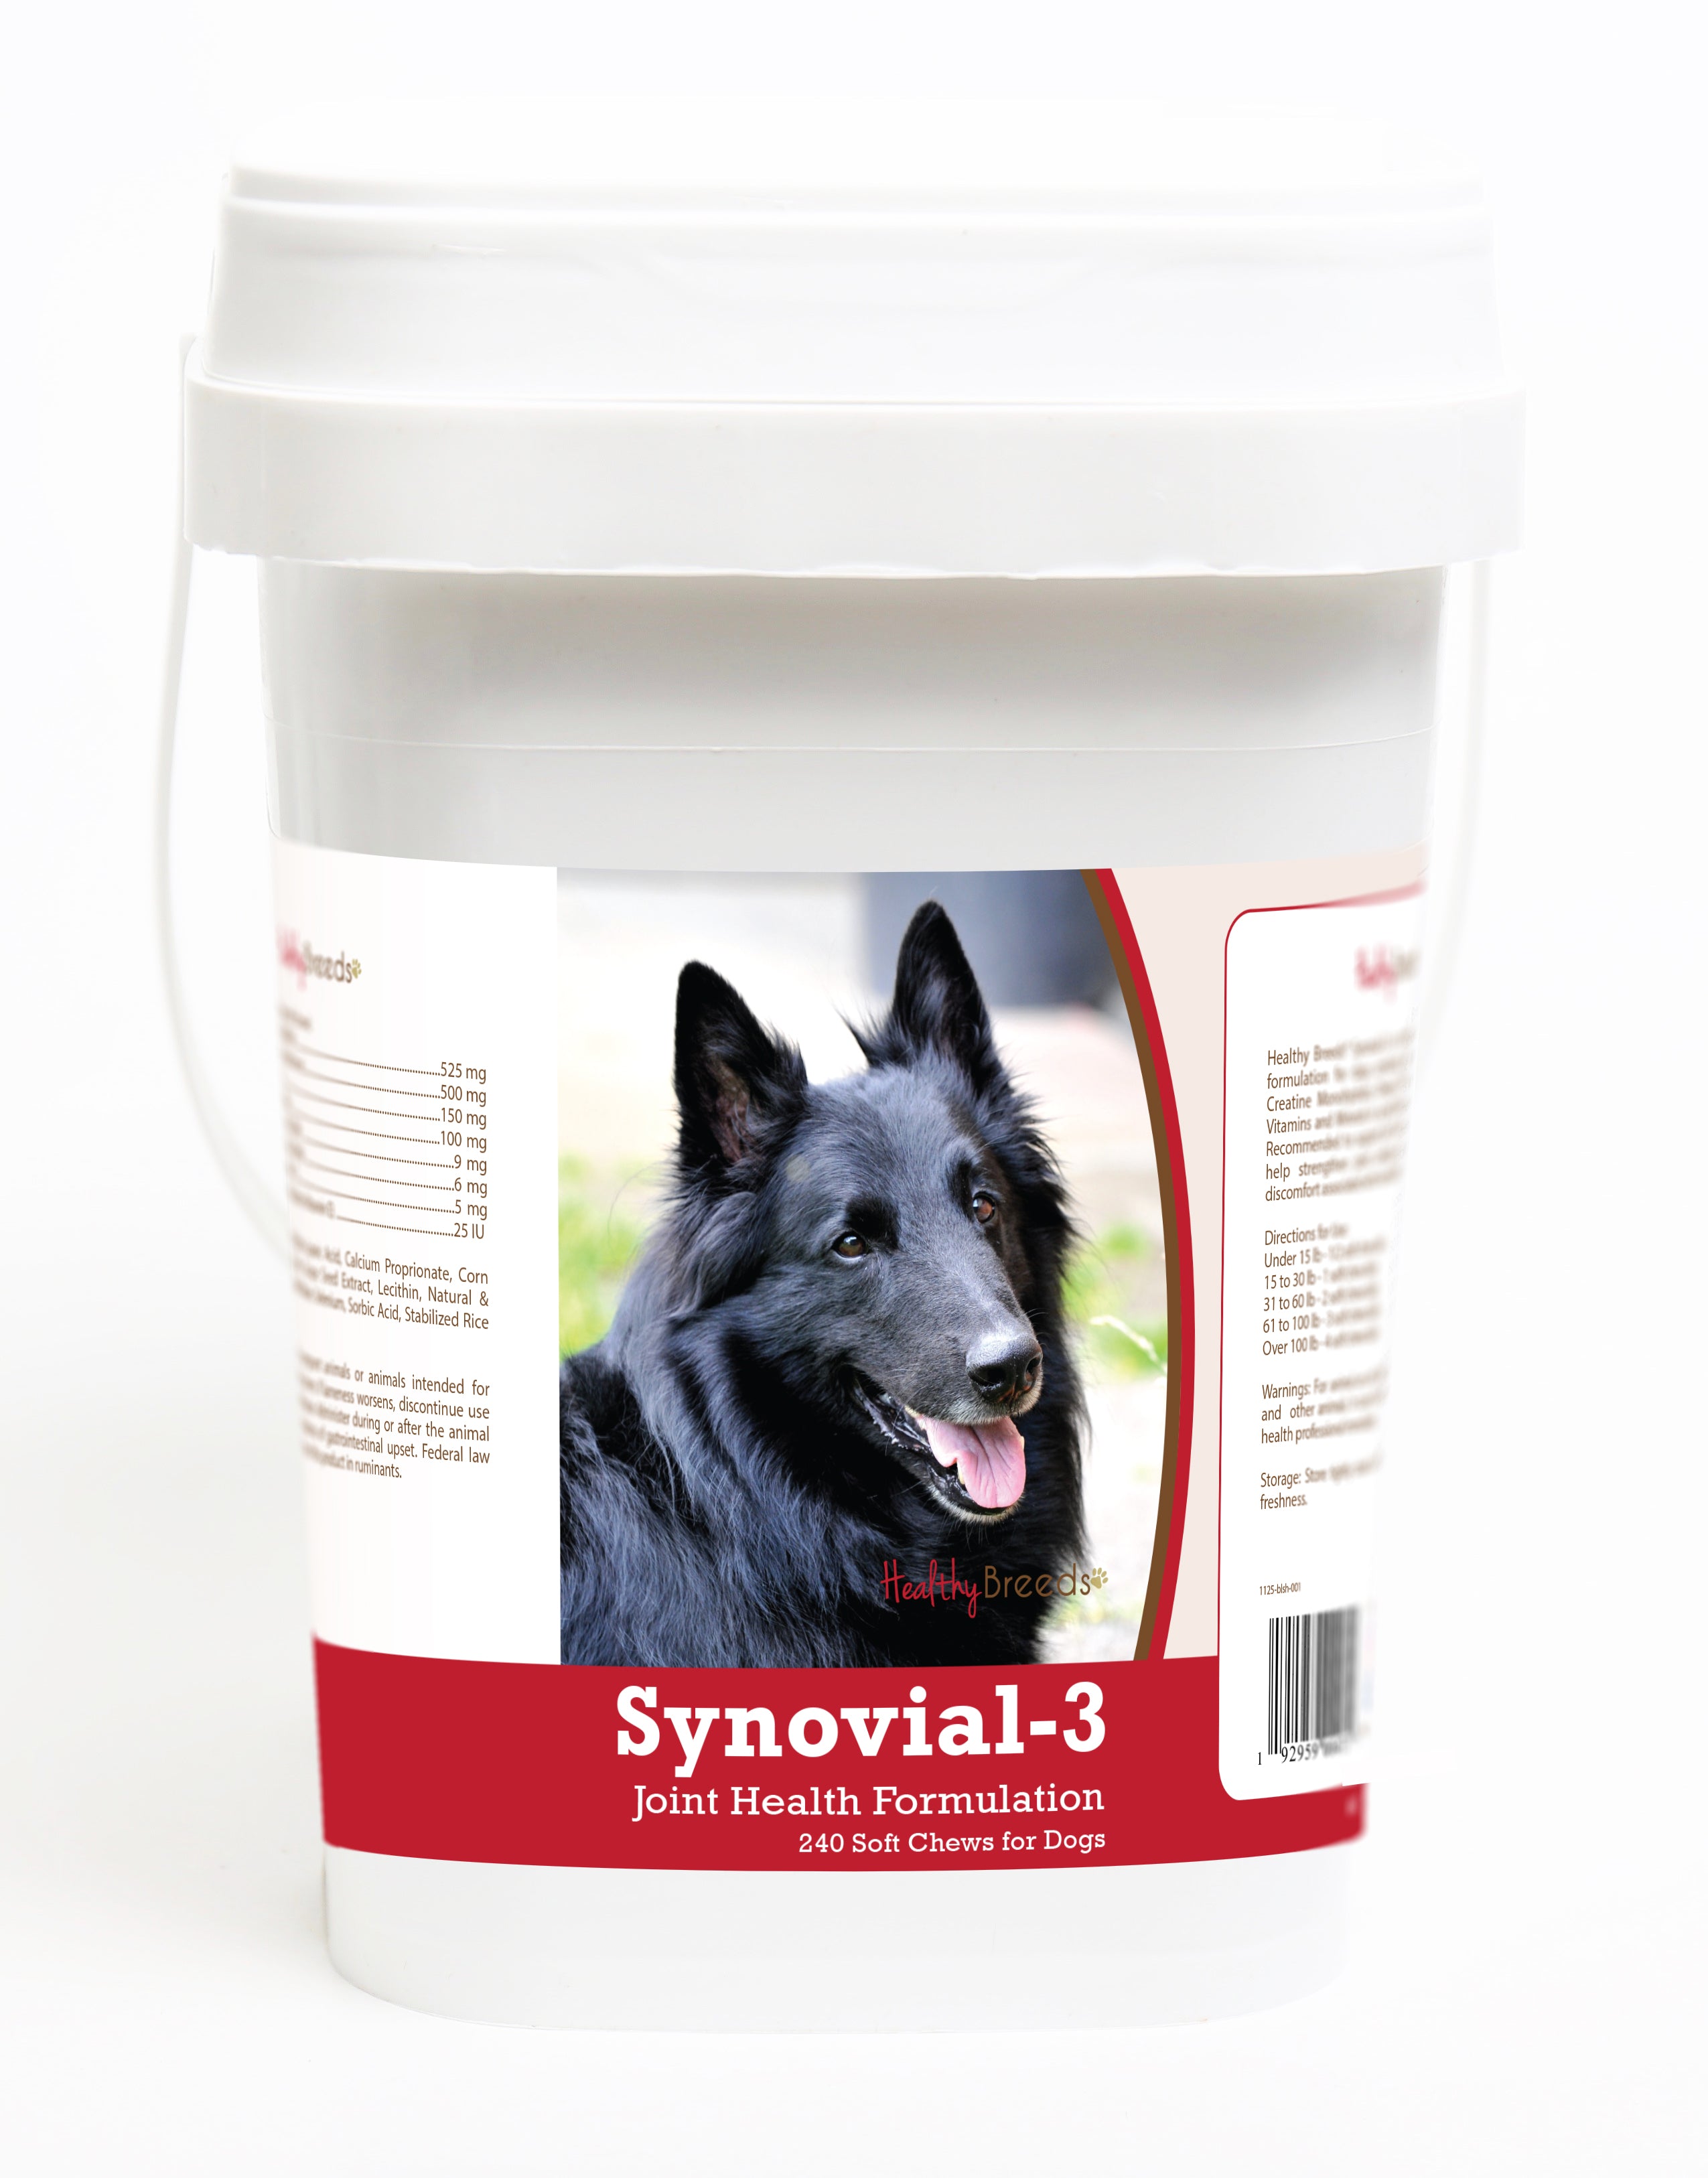 Belgian Sheepdog Synovial-3 Joint Health Formulation Soft Chews 240 Count